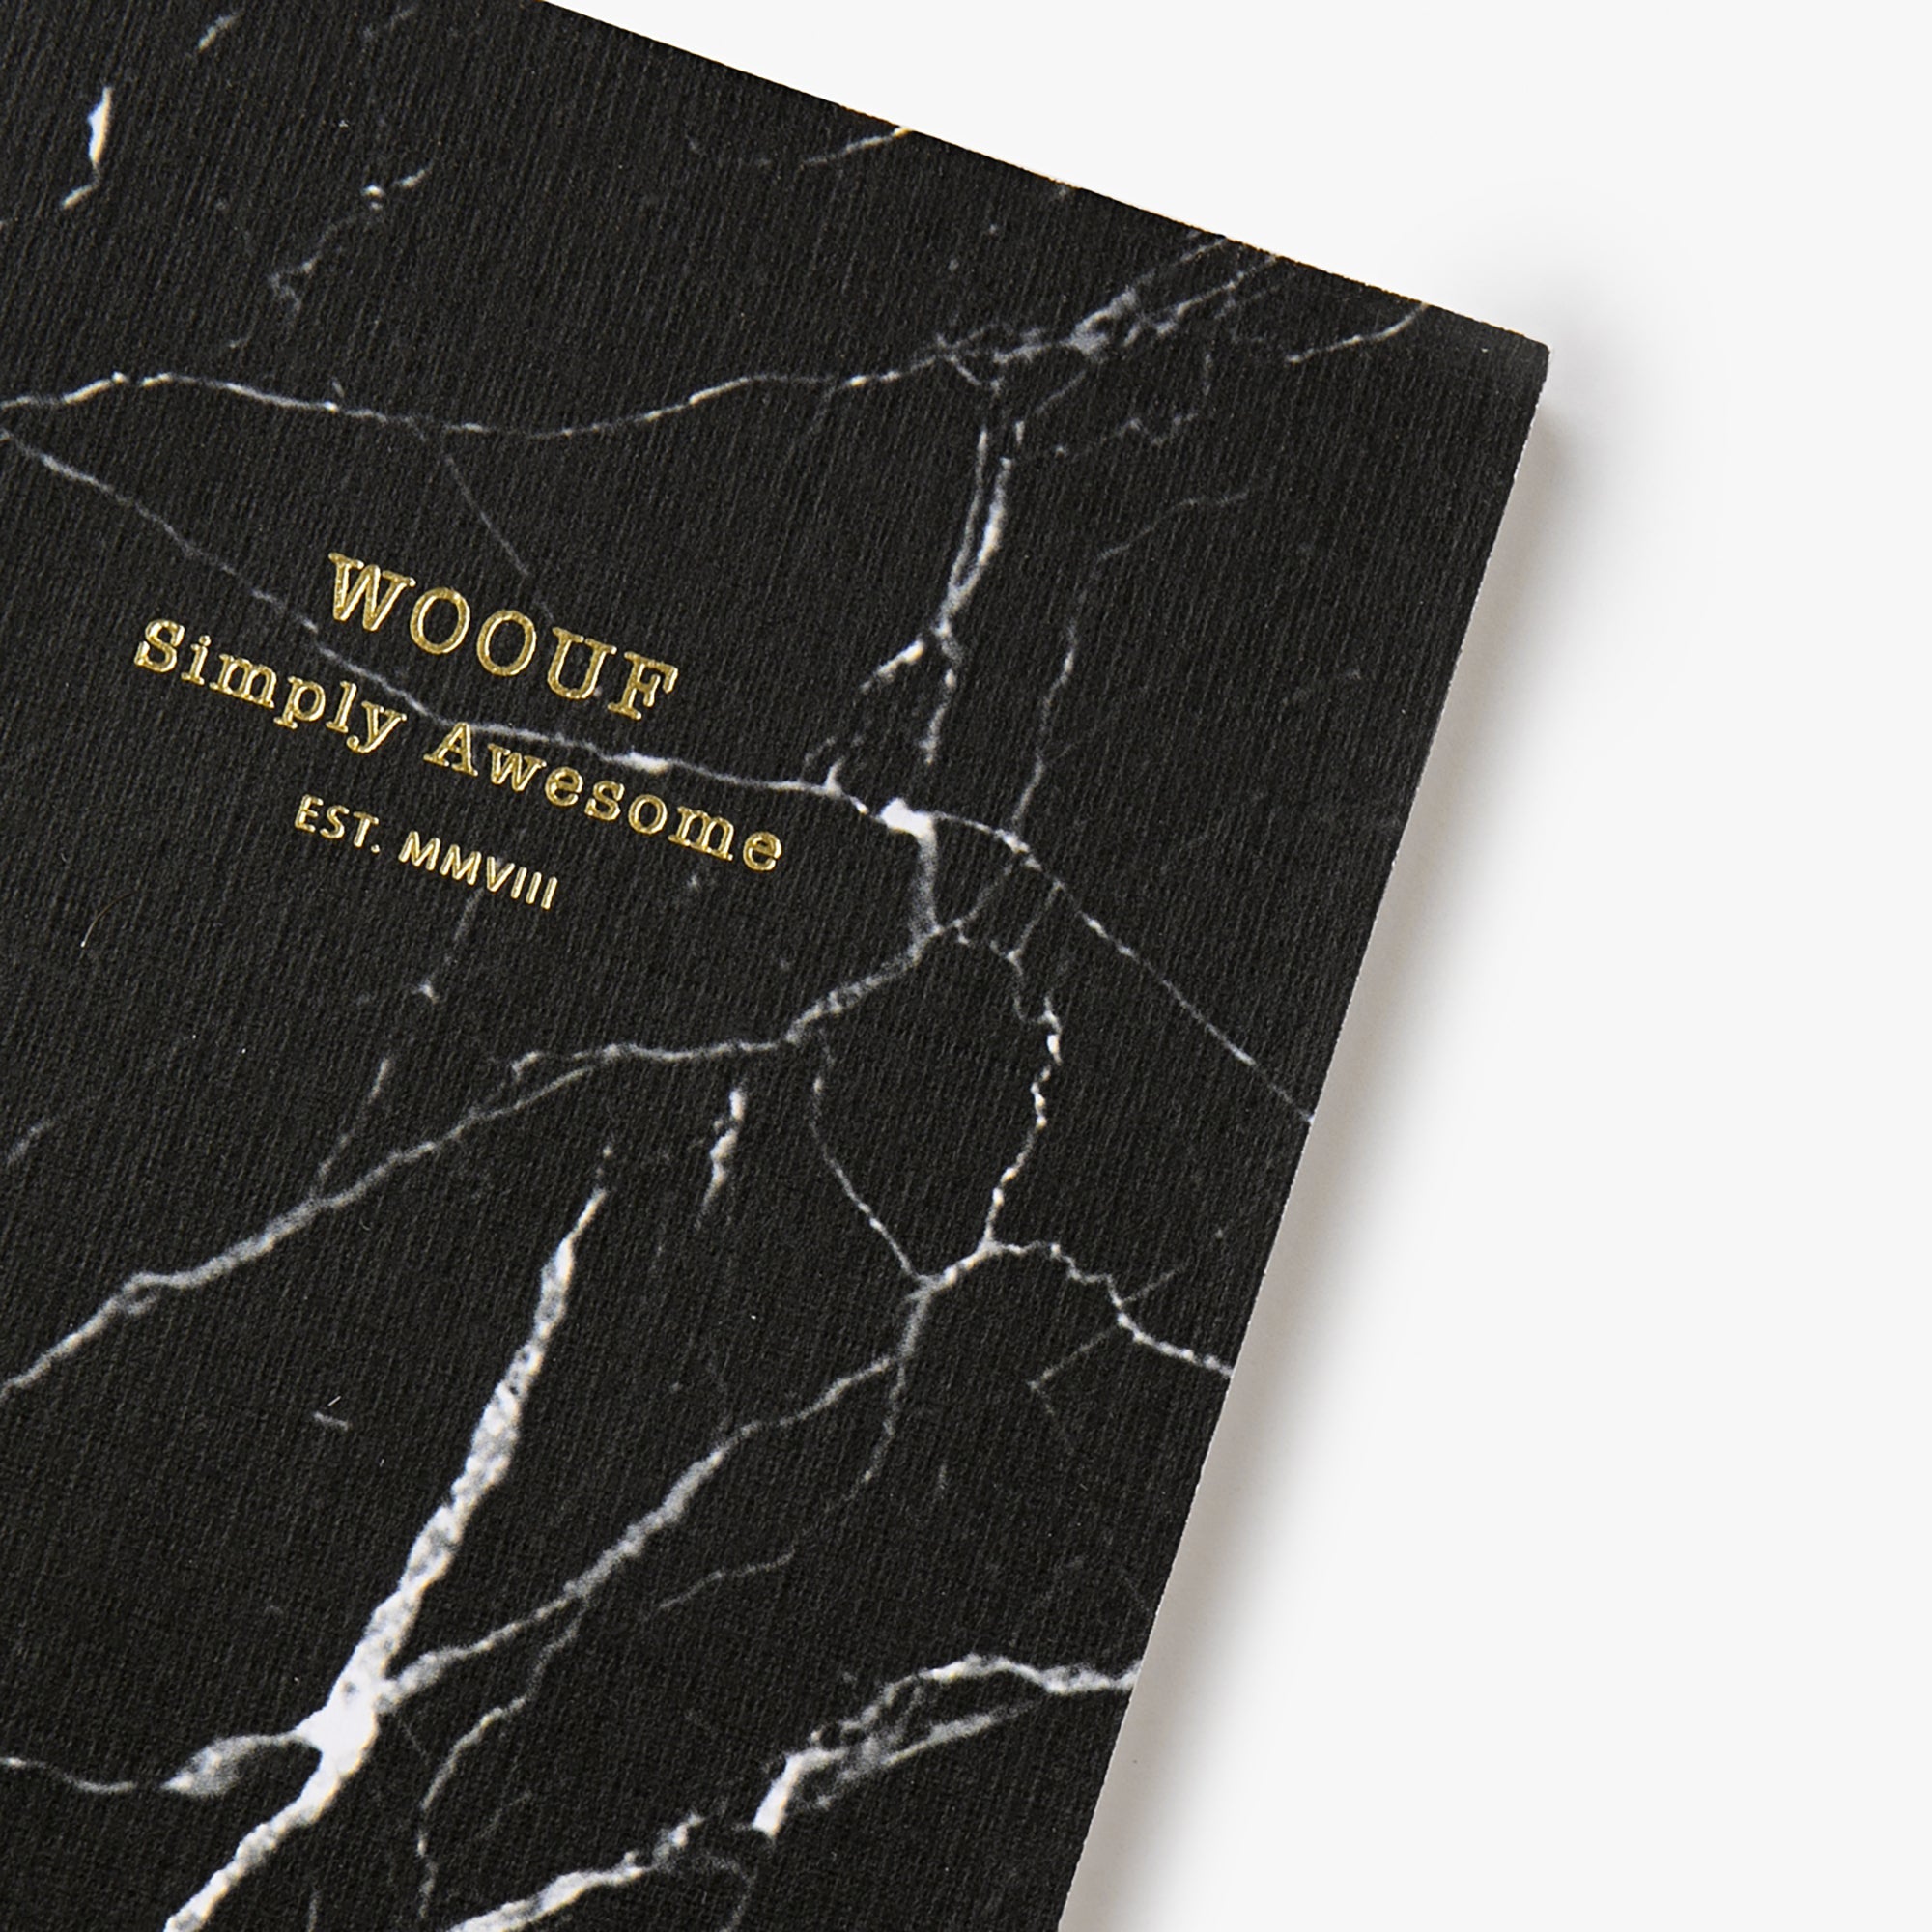 Cahier original ligné - Format A6 - Black Marble by WOUF